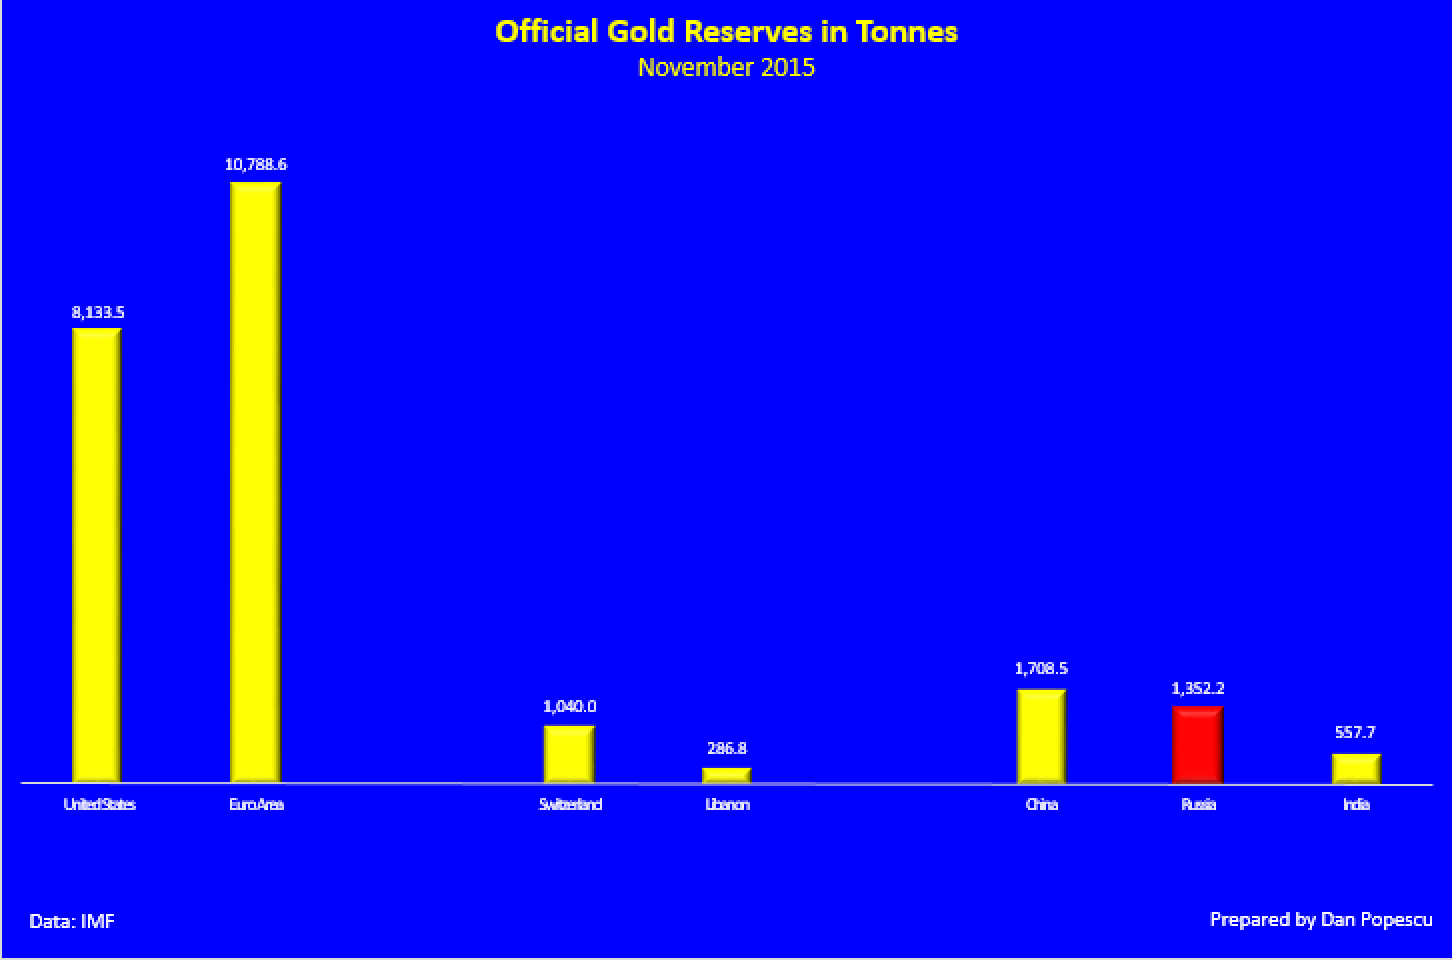 Official gold reserves in tonnes